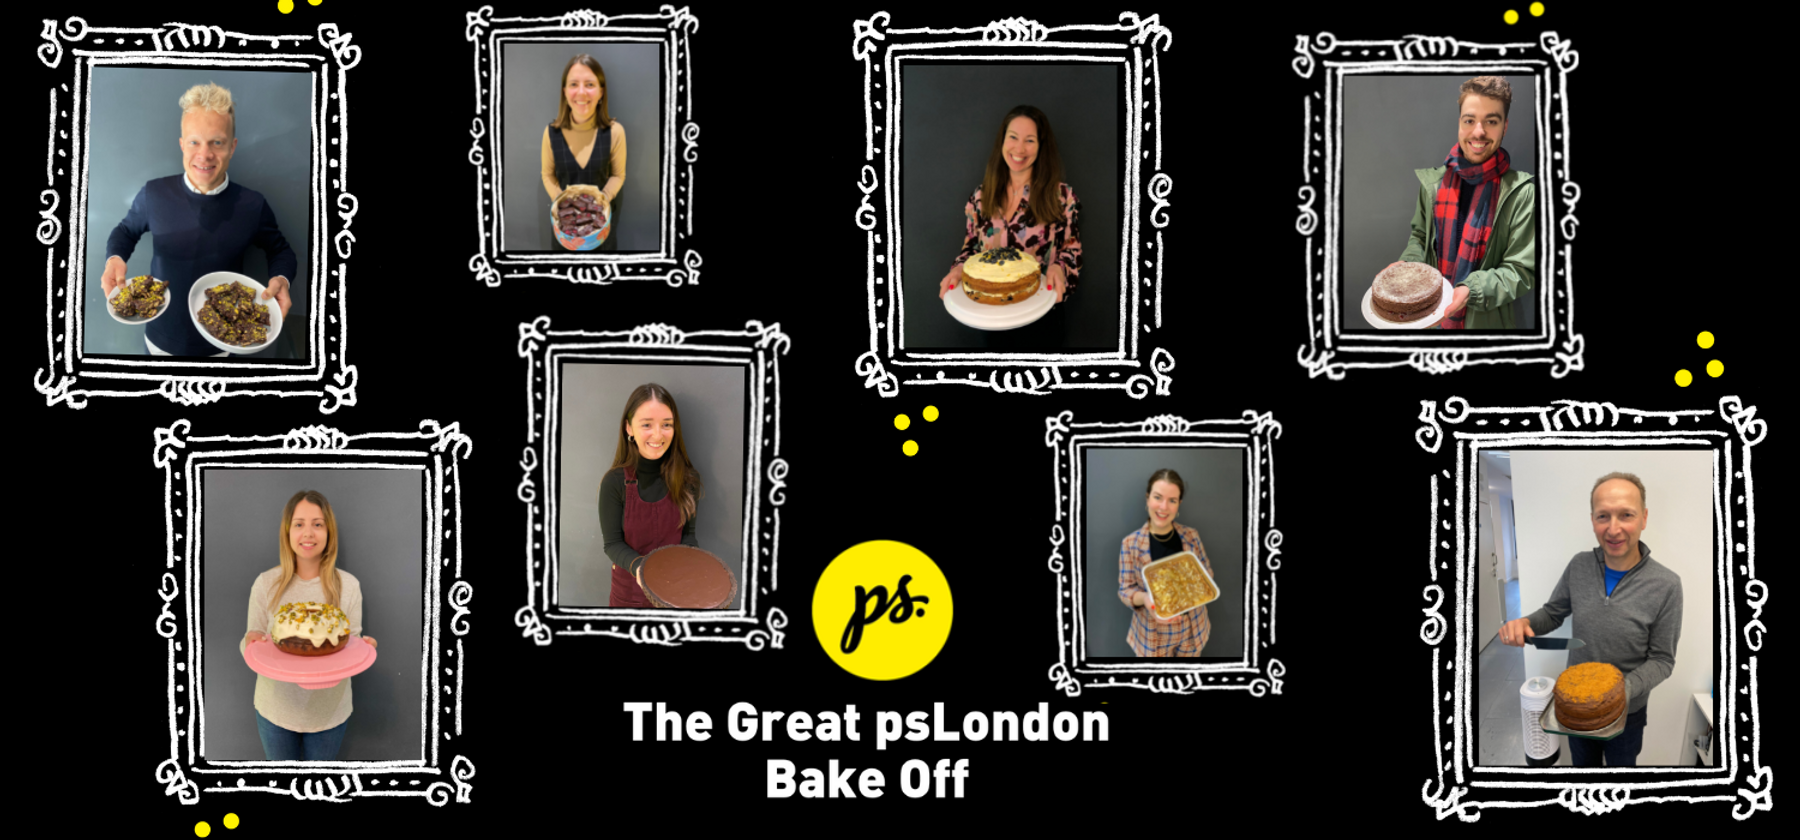 People holding cakes for bake off